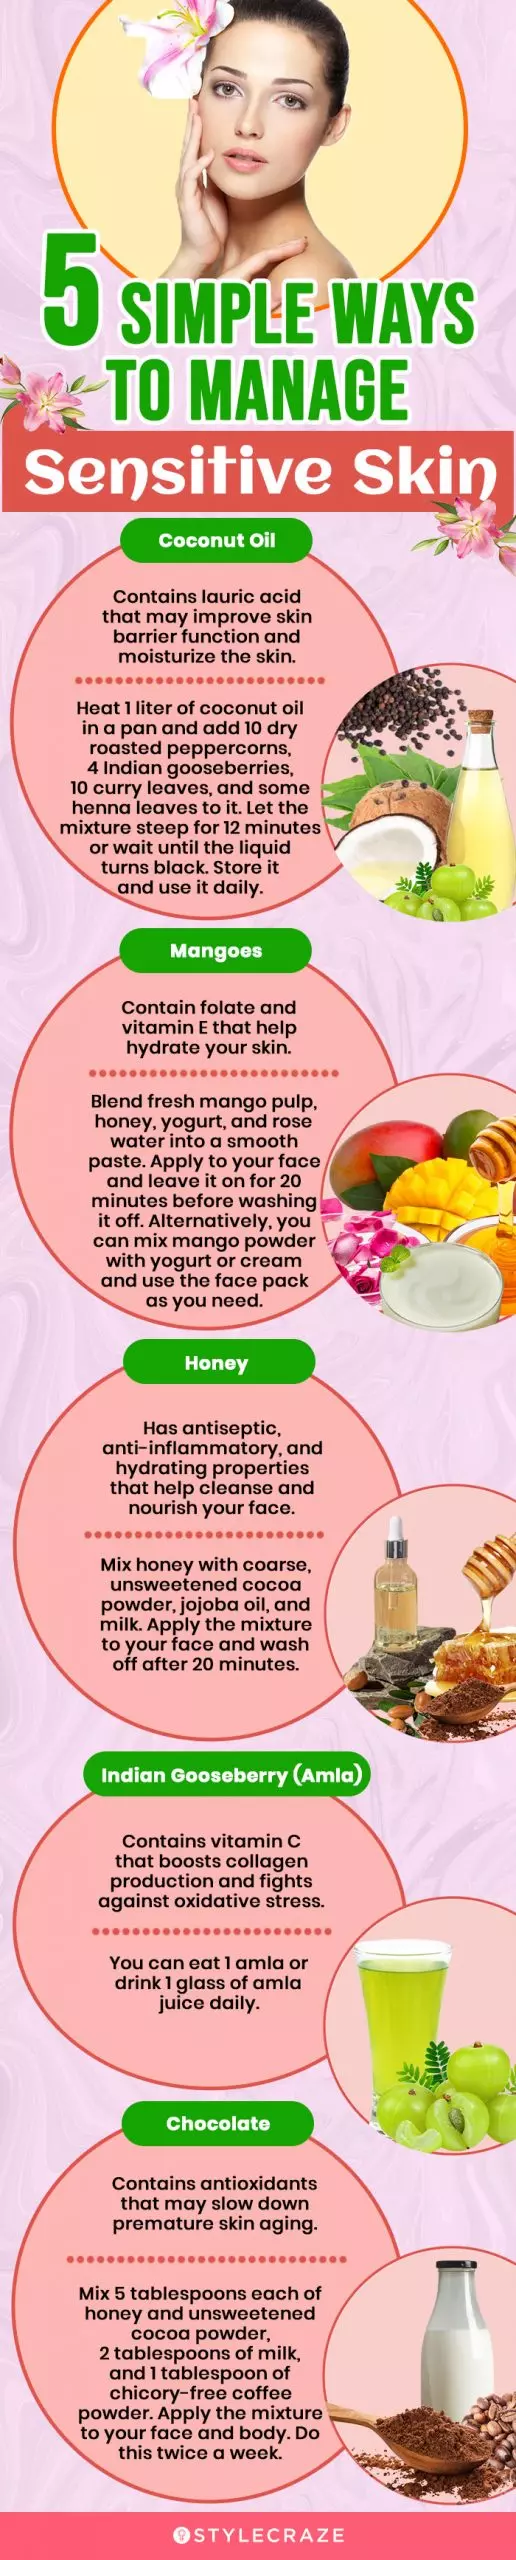 5 simple ways to manage sensitive skin (infographic)